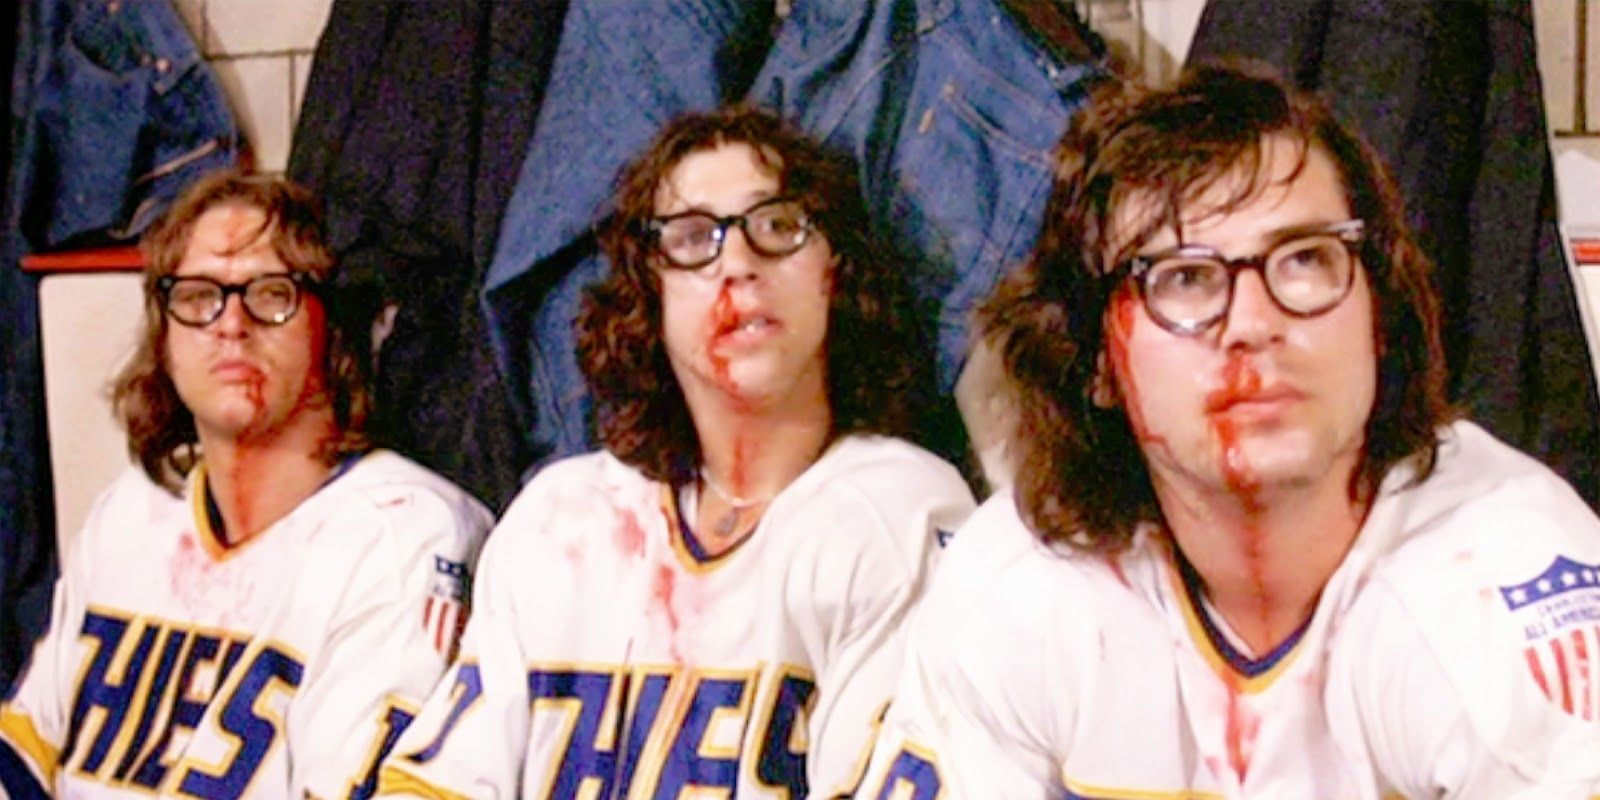 Cast of Slap Shot on the bench with bloody noses.